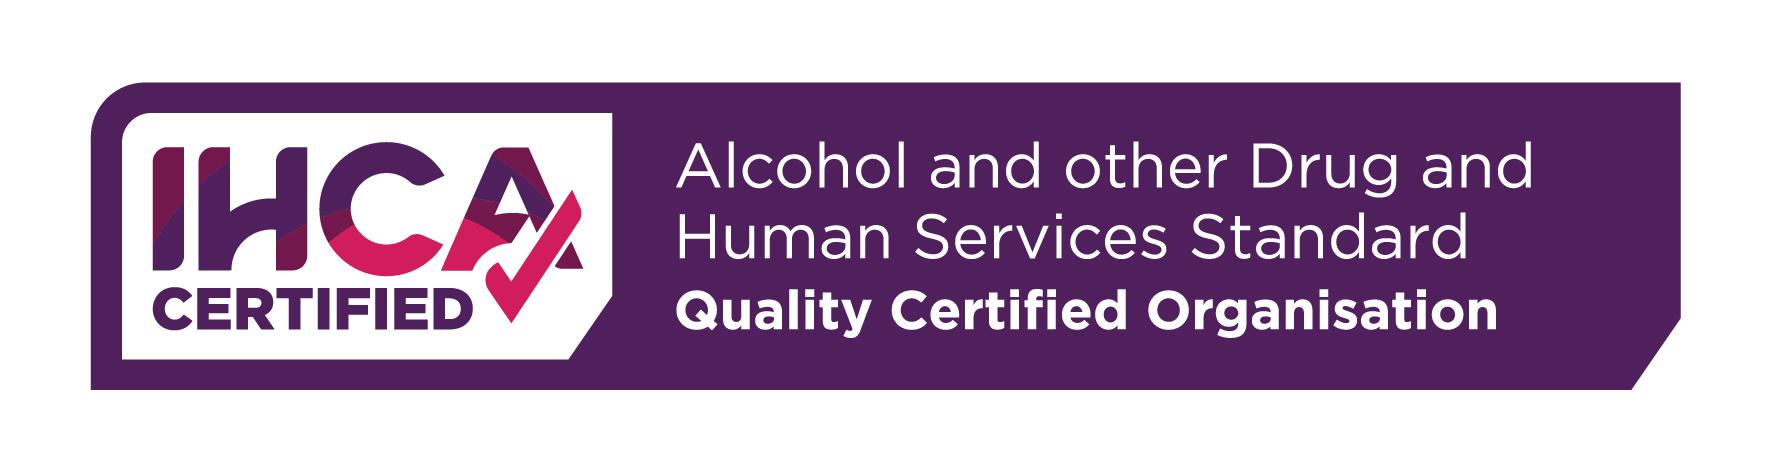 IHCA RGB SchemeCertification Alcohol and other Drug and Human Services Standard Positive